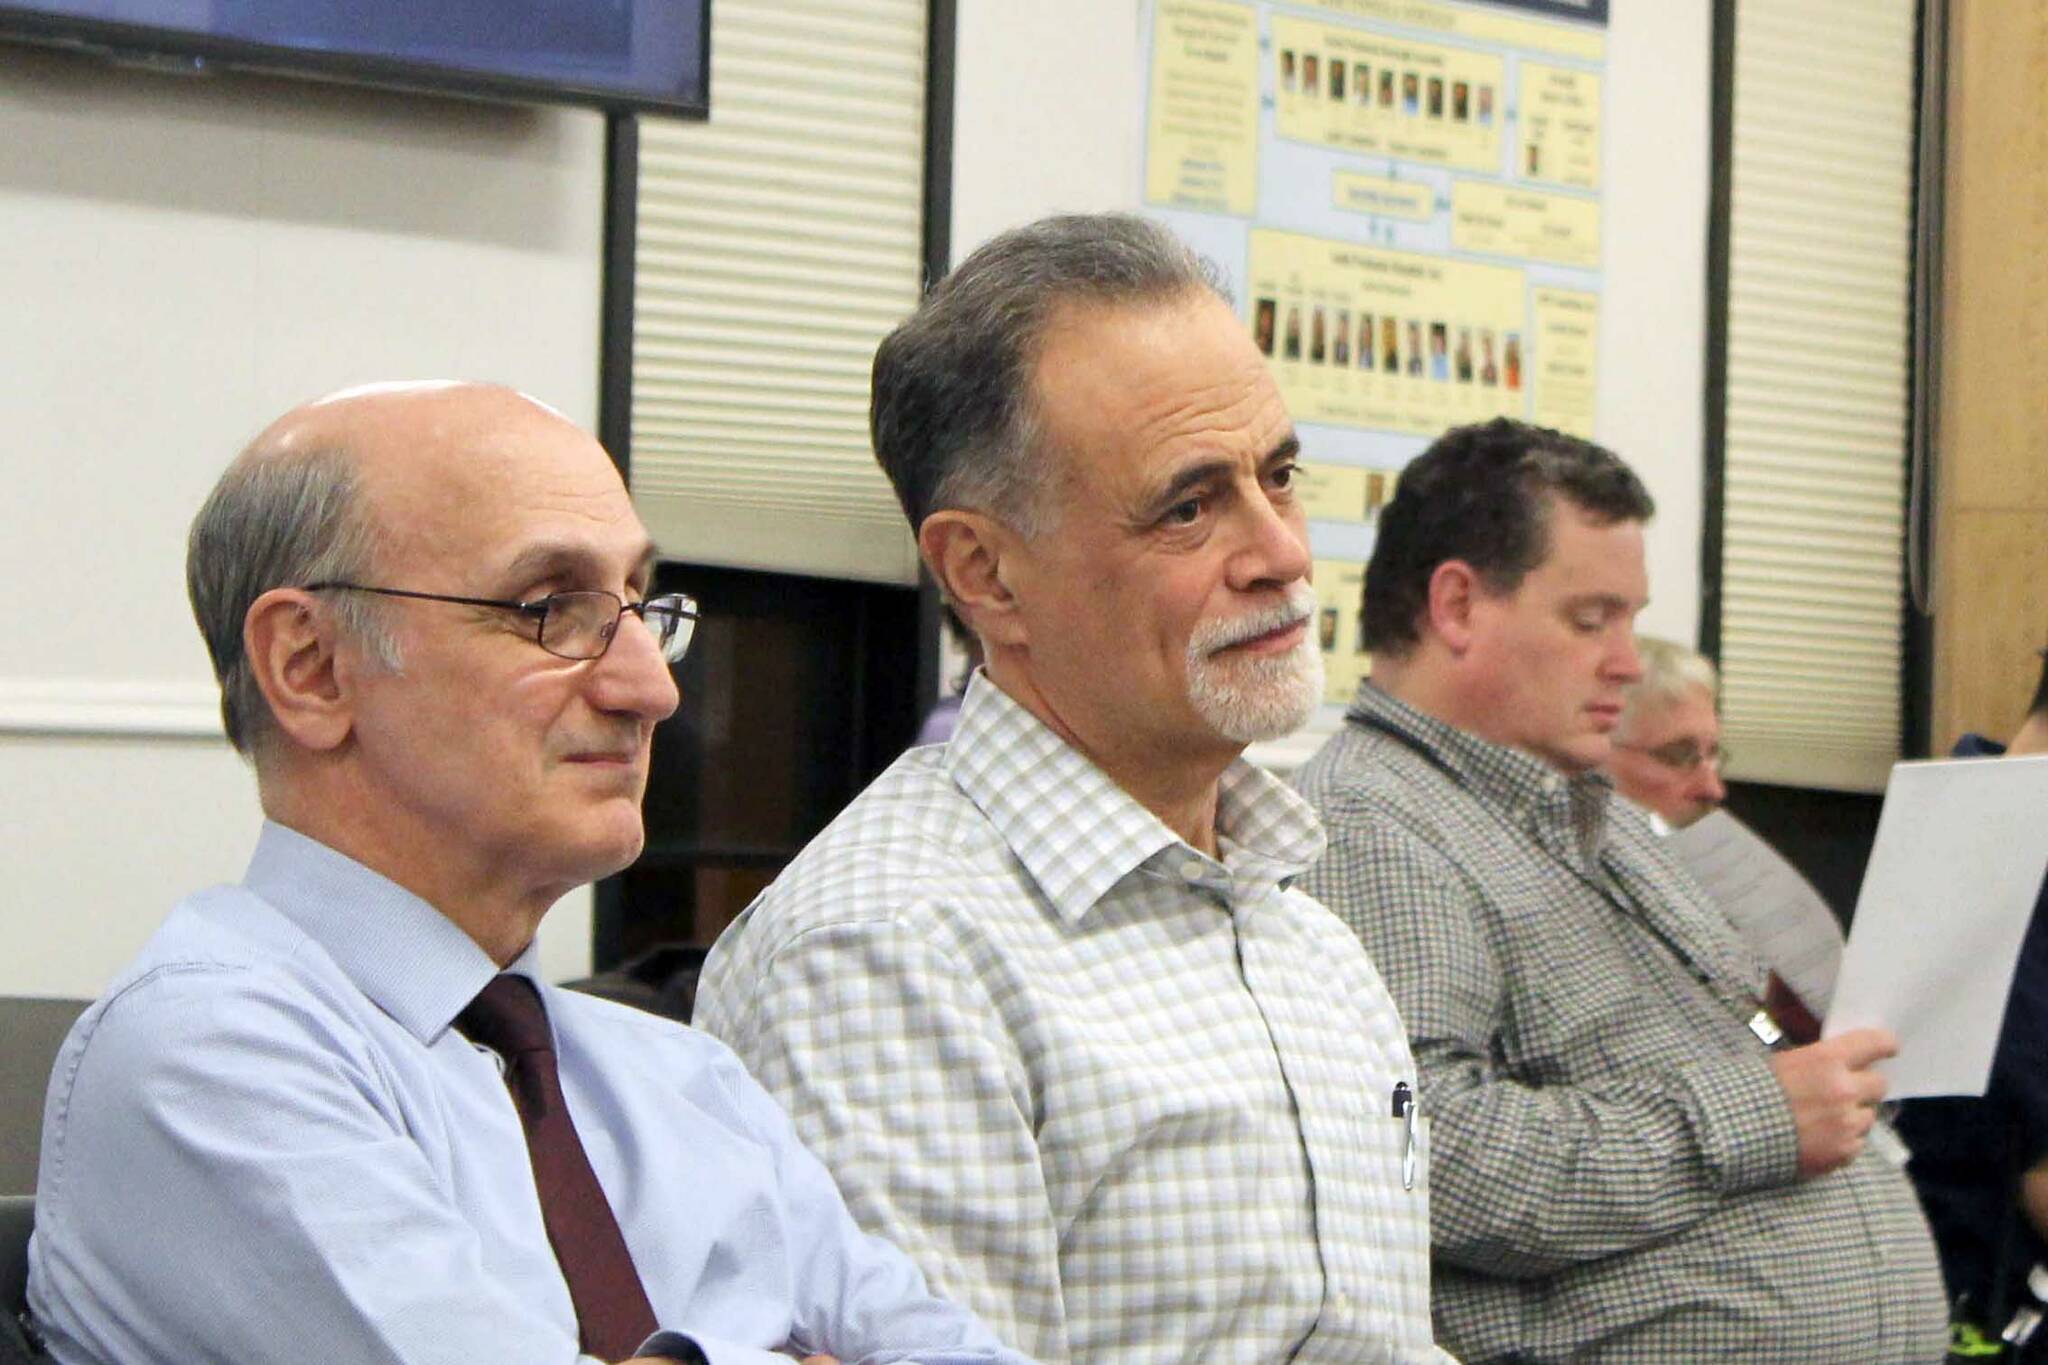 Peter Micciche (center) listens to the Kenai Peninsula Borough Assembly certify the results of the Feb. 14, 2023, special mayoral election, through which he was elected mayor of the Kenai Peninsula Borough, on Tuesday, Feb. 21, 2023 in Soldotna, Alaska. (Ashlyn O’Hara/Peninsula Clarion)